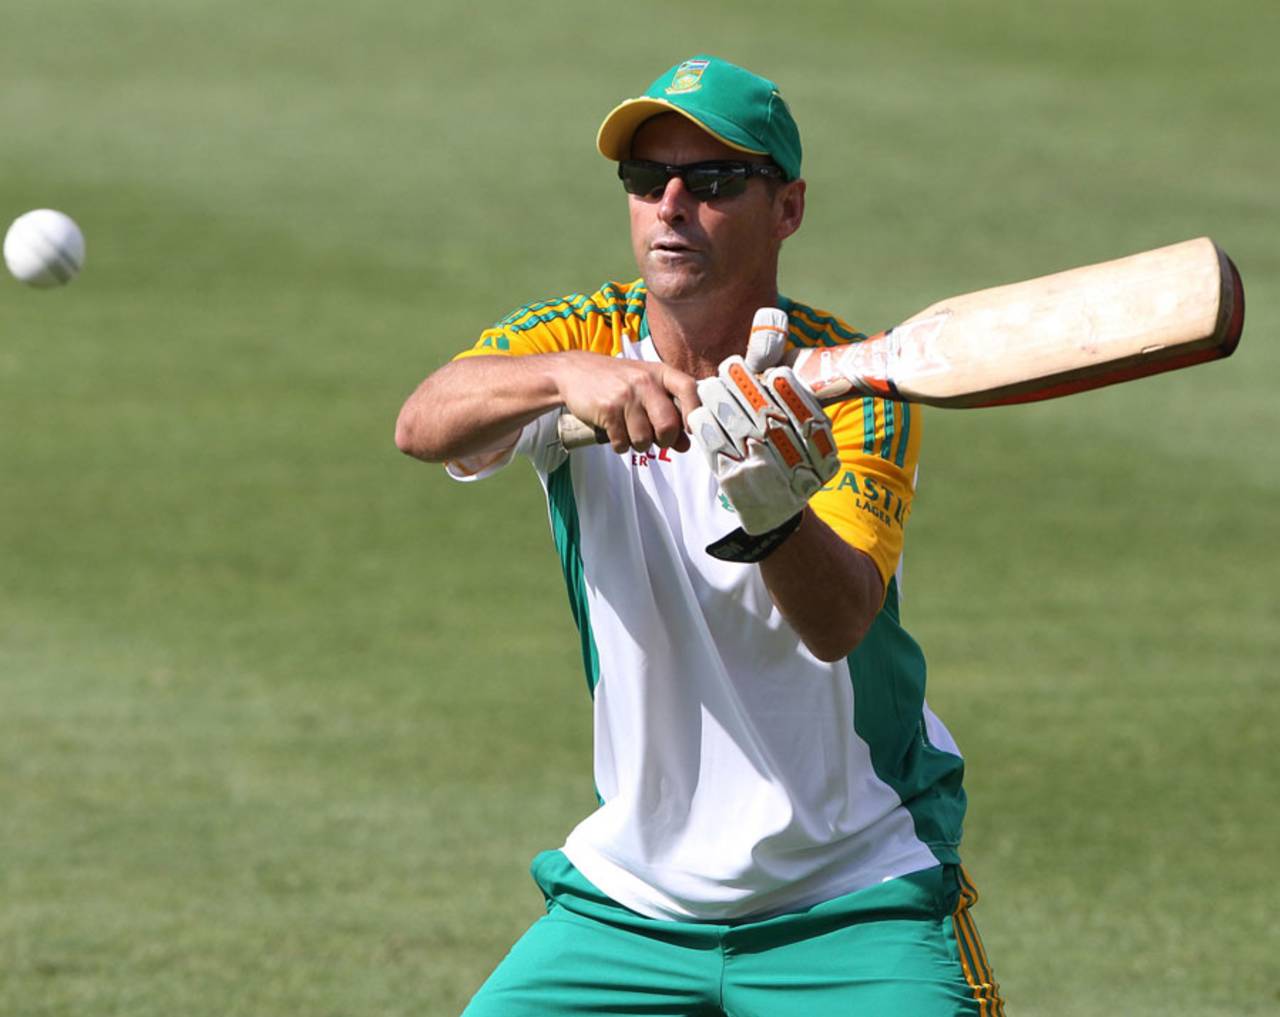 Gary Kirsten gives catching practice, Cape Town, October 10, 2011